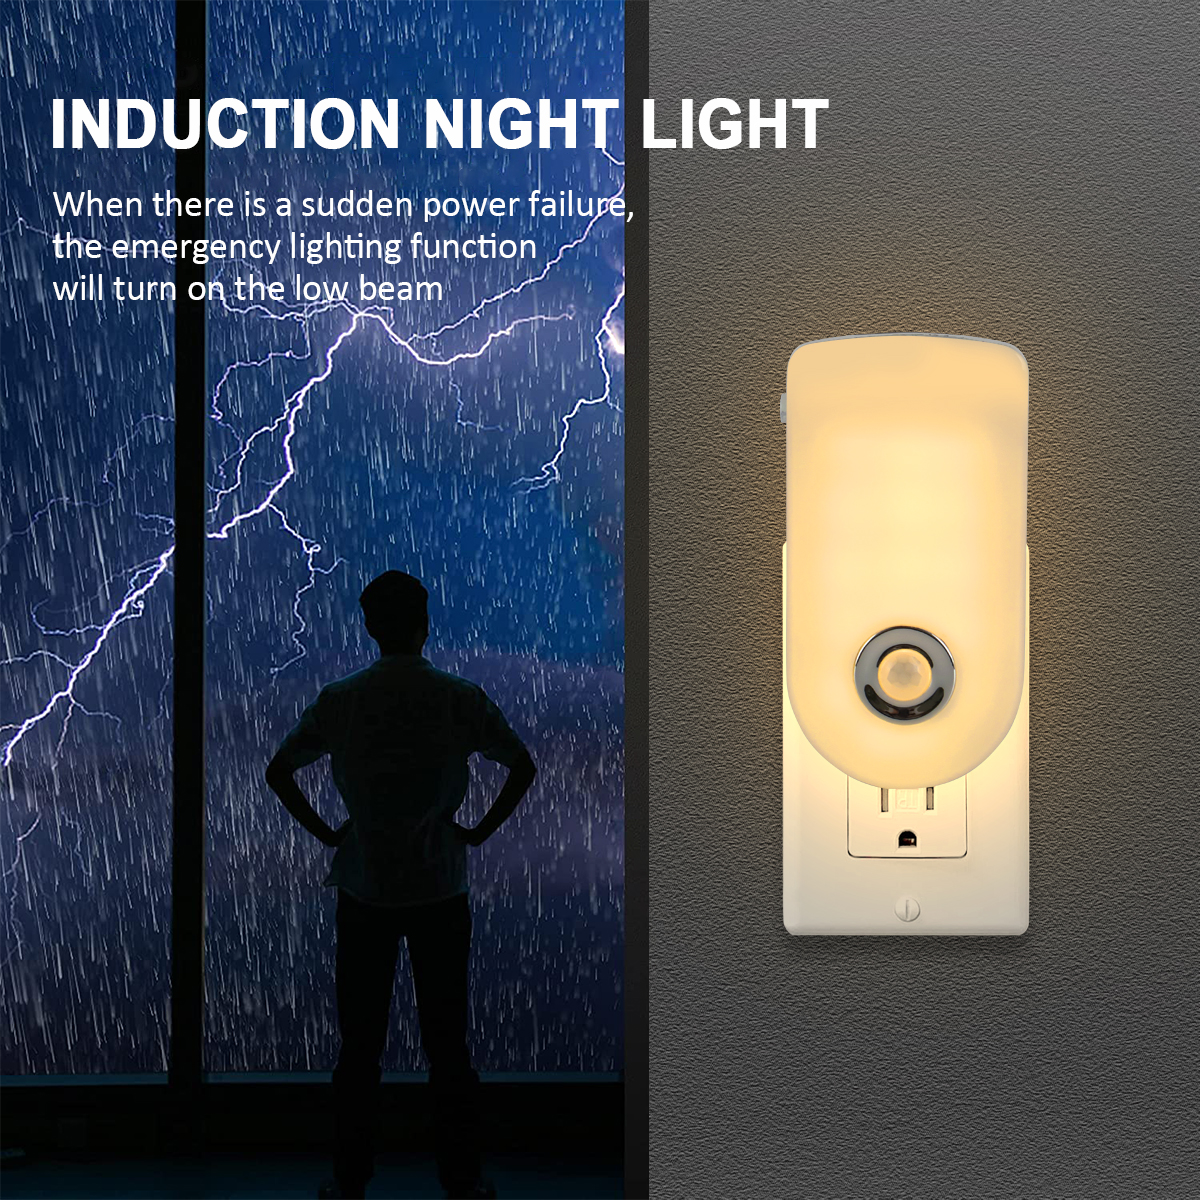 Inductive night light, can be used as a flashlight